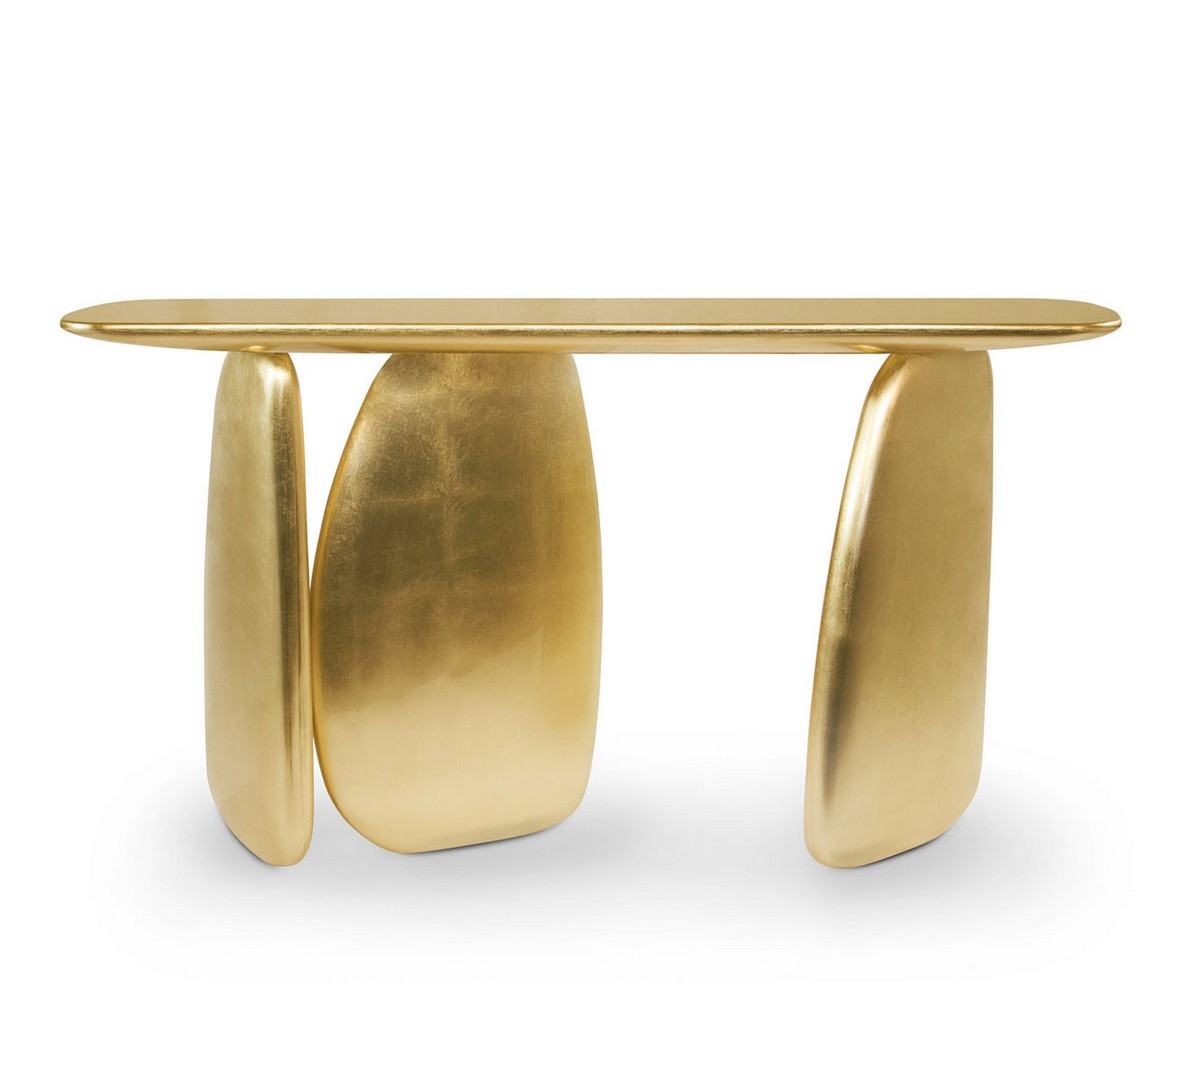 Bespoke Golden Consoles Tables To Make Your Living Room Shine